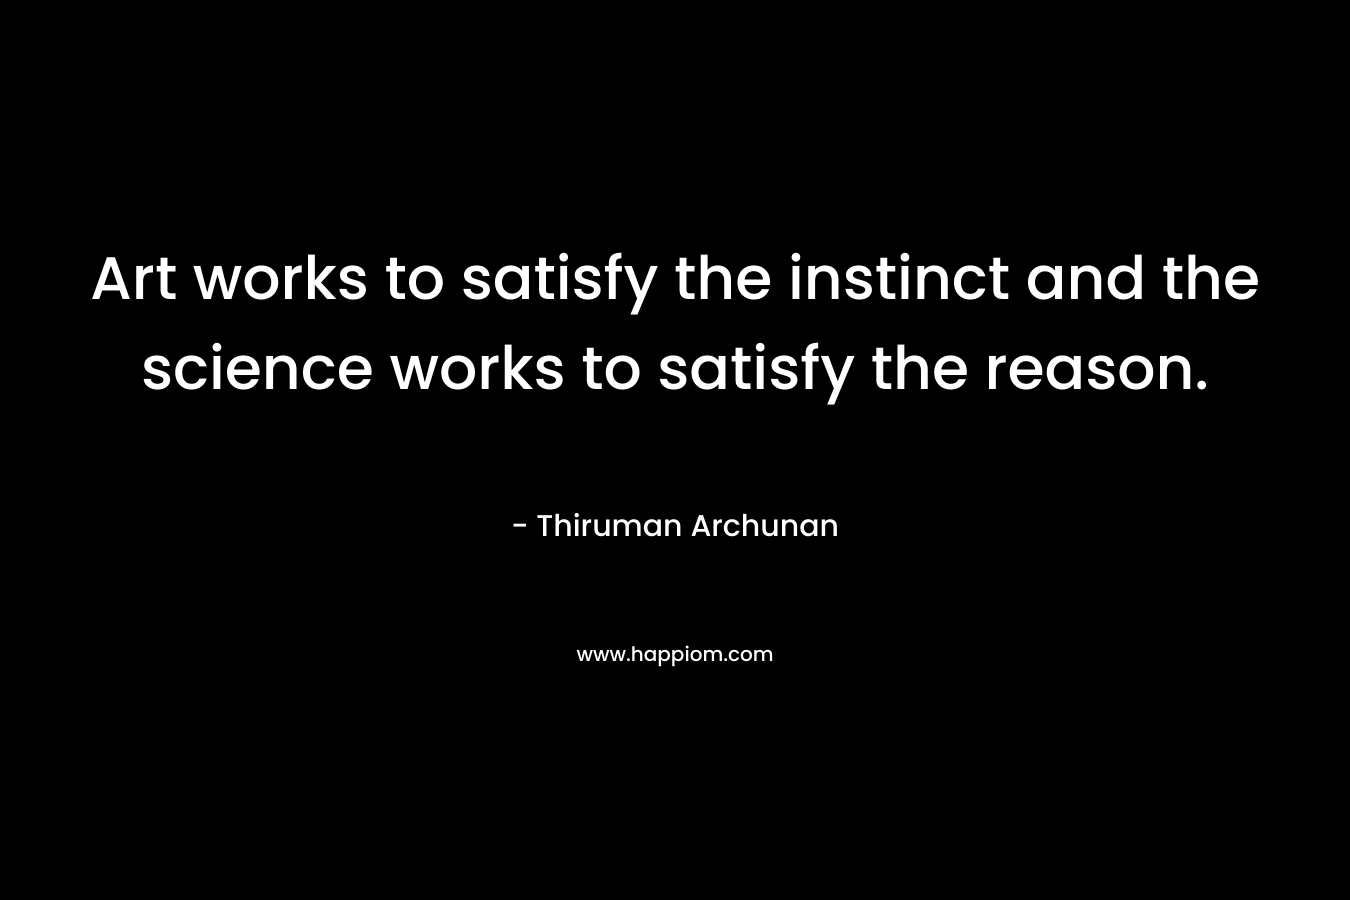 Art works to satisfy the instinct and the science works to satisfy the reason. – Thiruman Archunan